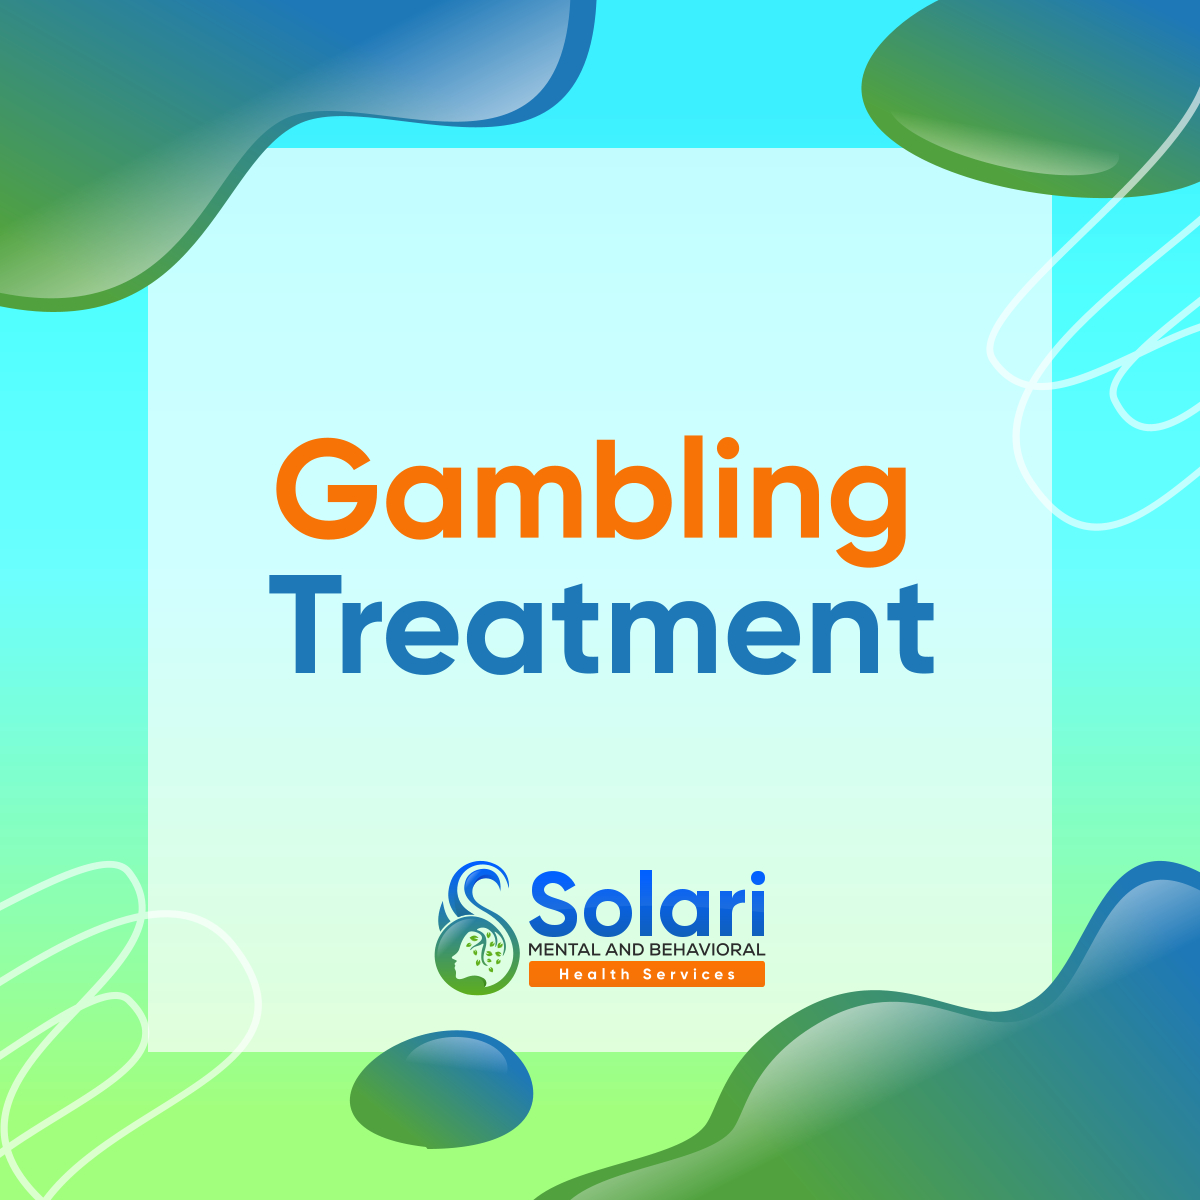 Treatment for compulsive gambling may involve an outpatient program, inpatient program, or a residential treatment program for an individual patient. Self-help groups give great advice to help in the treatment.

#CharlotteNC #MentalHealthCare #GamblingTreatment